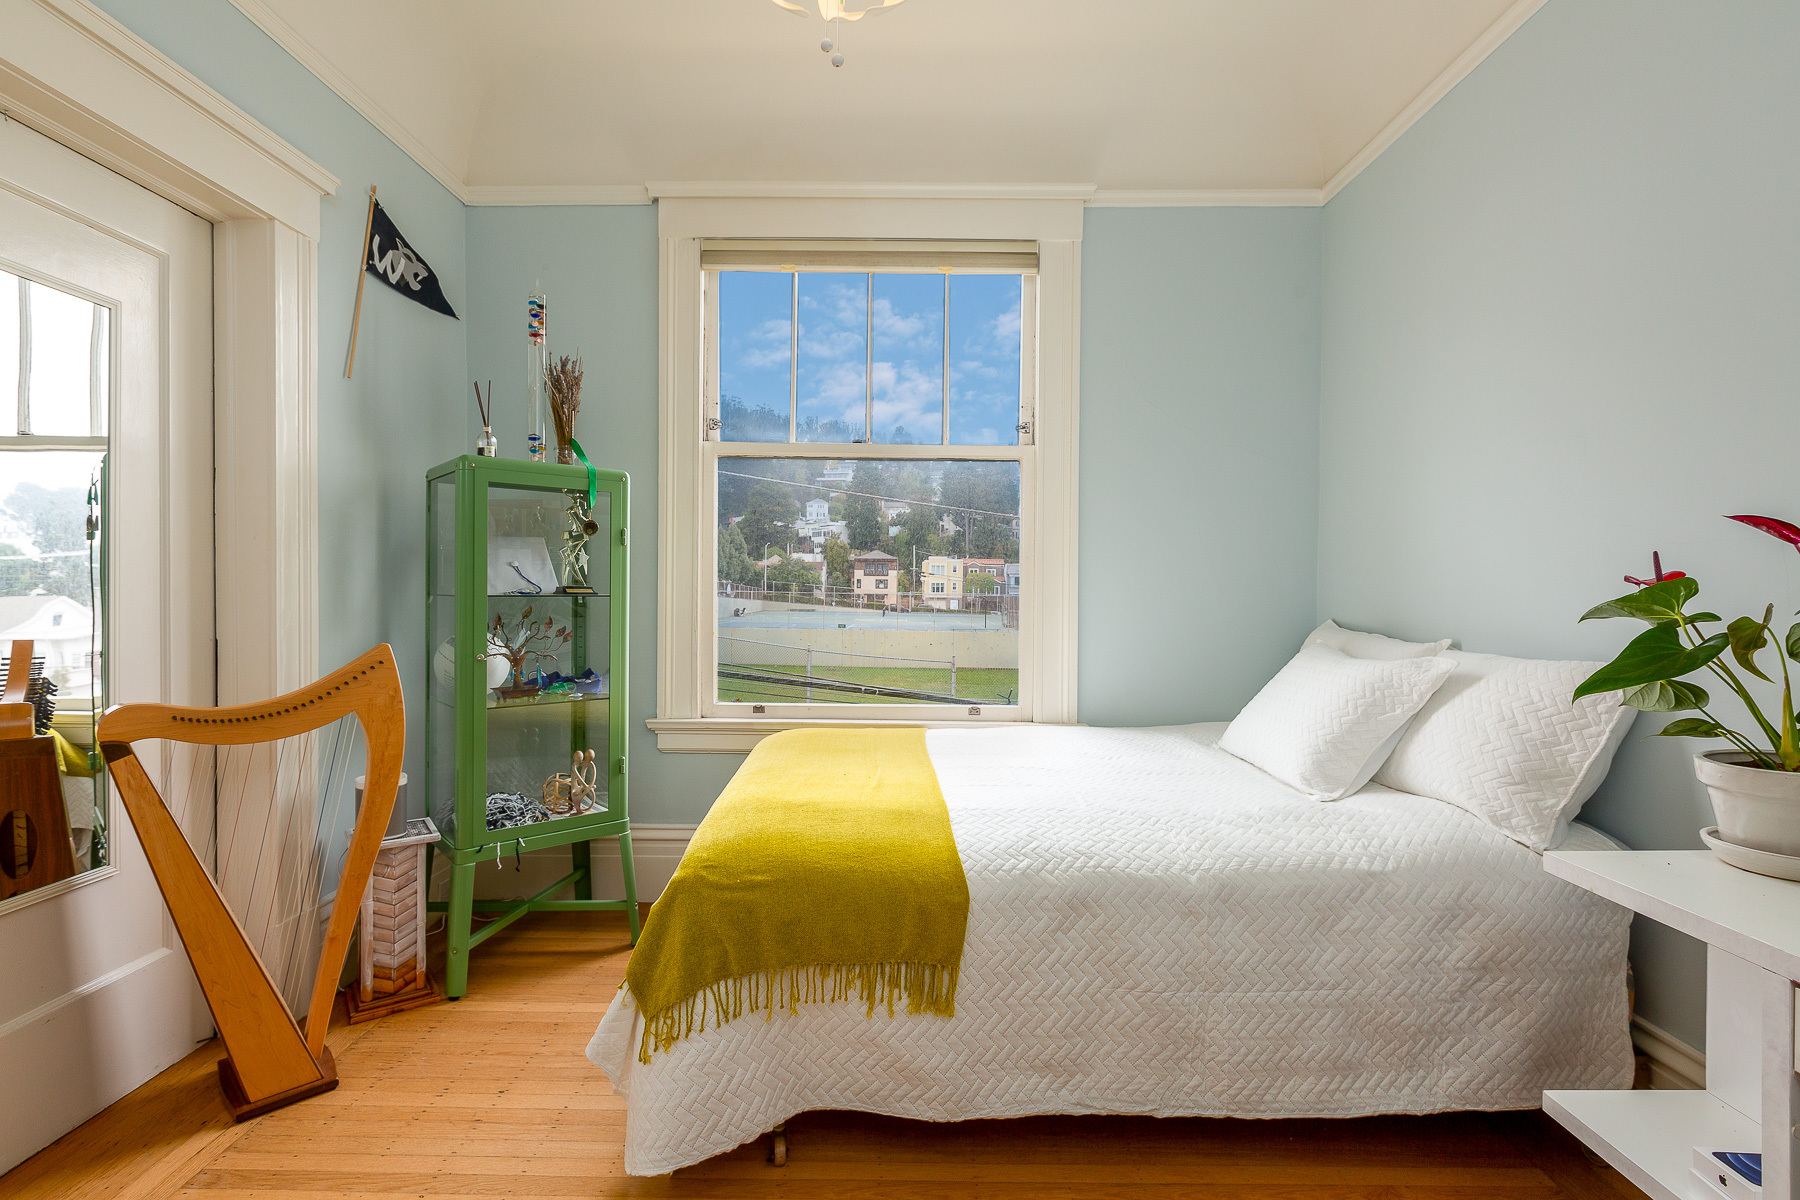 Property Photo: Bedroom one, showing wood floors and a large window